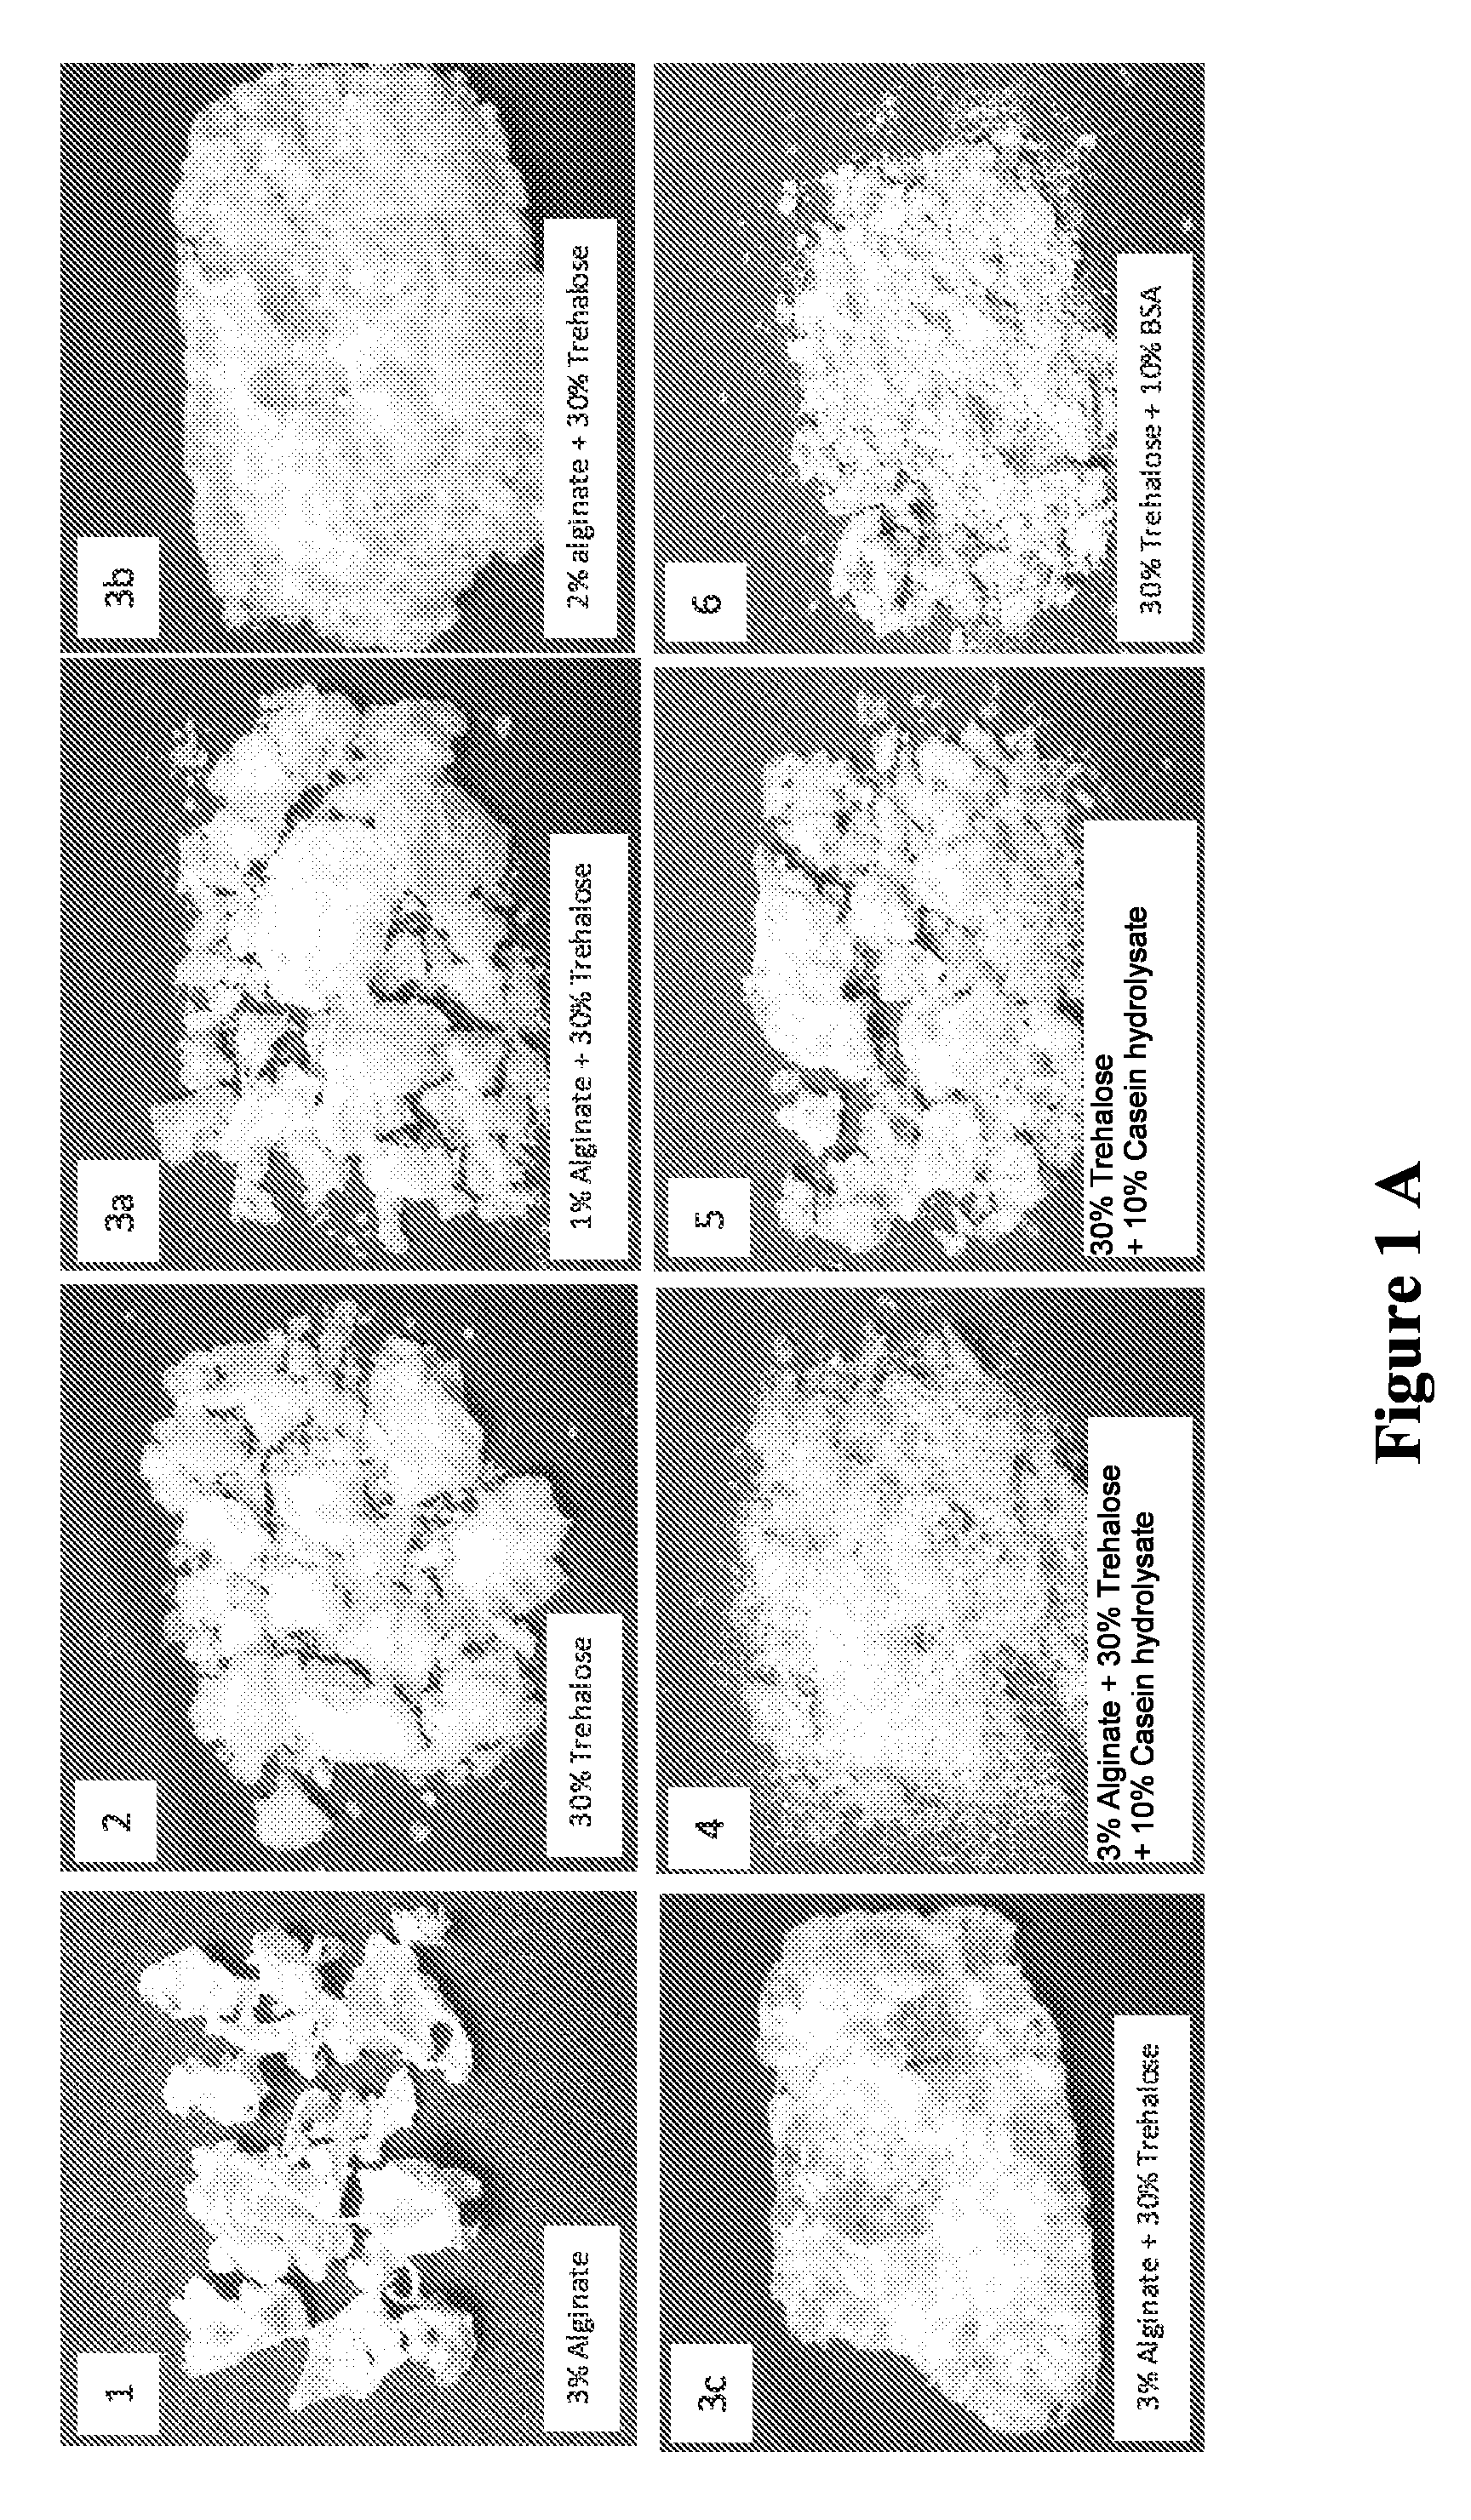 Dry glassy composition comprising a bioactive material